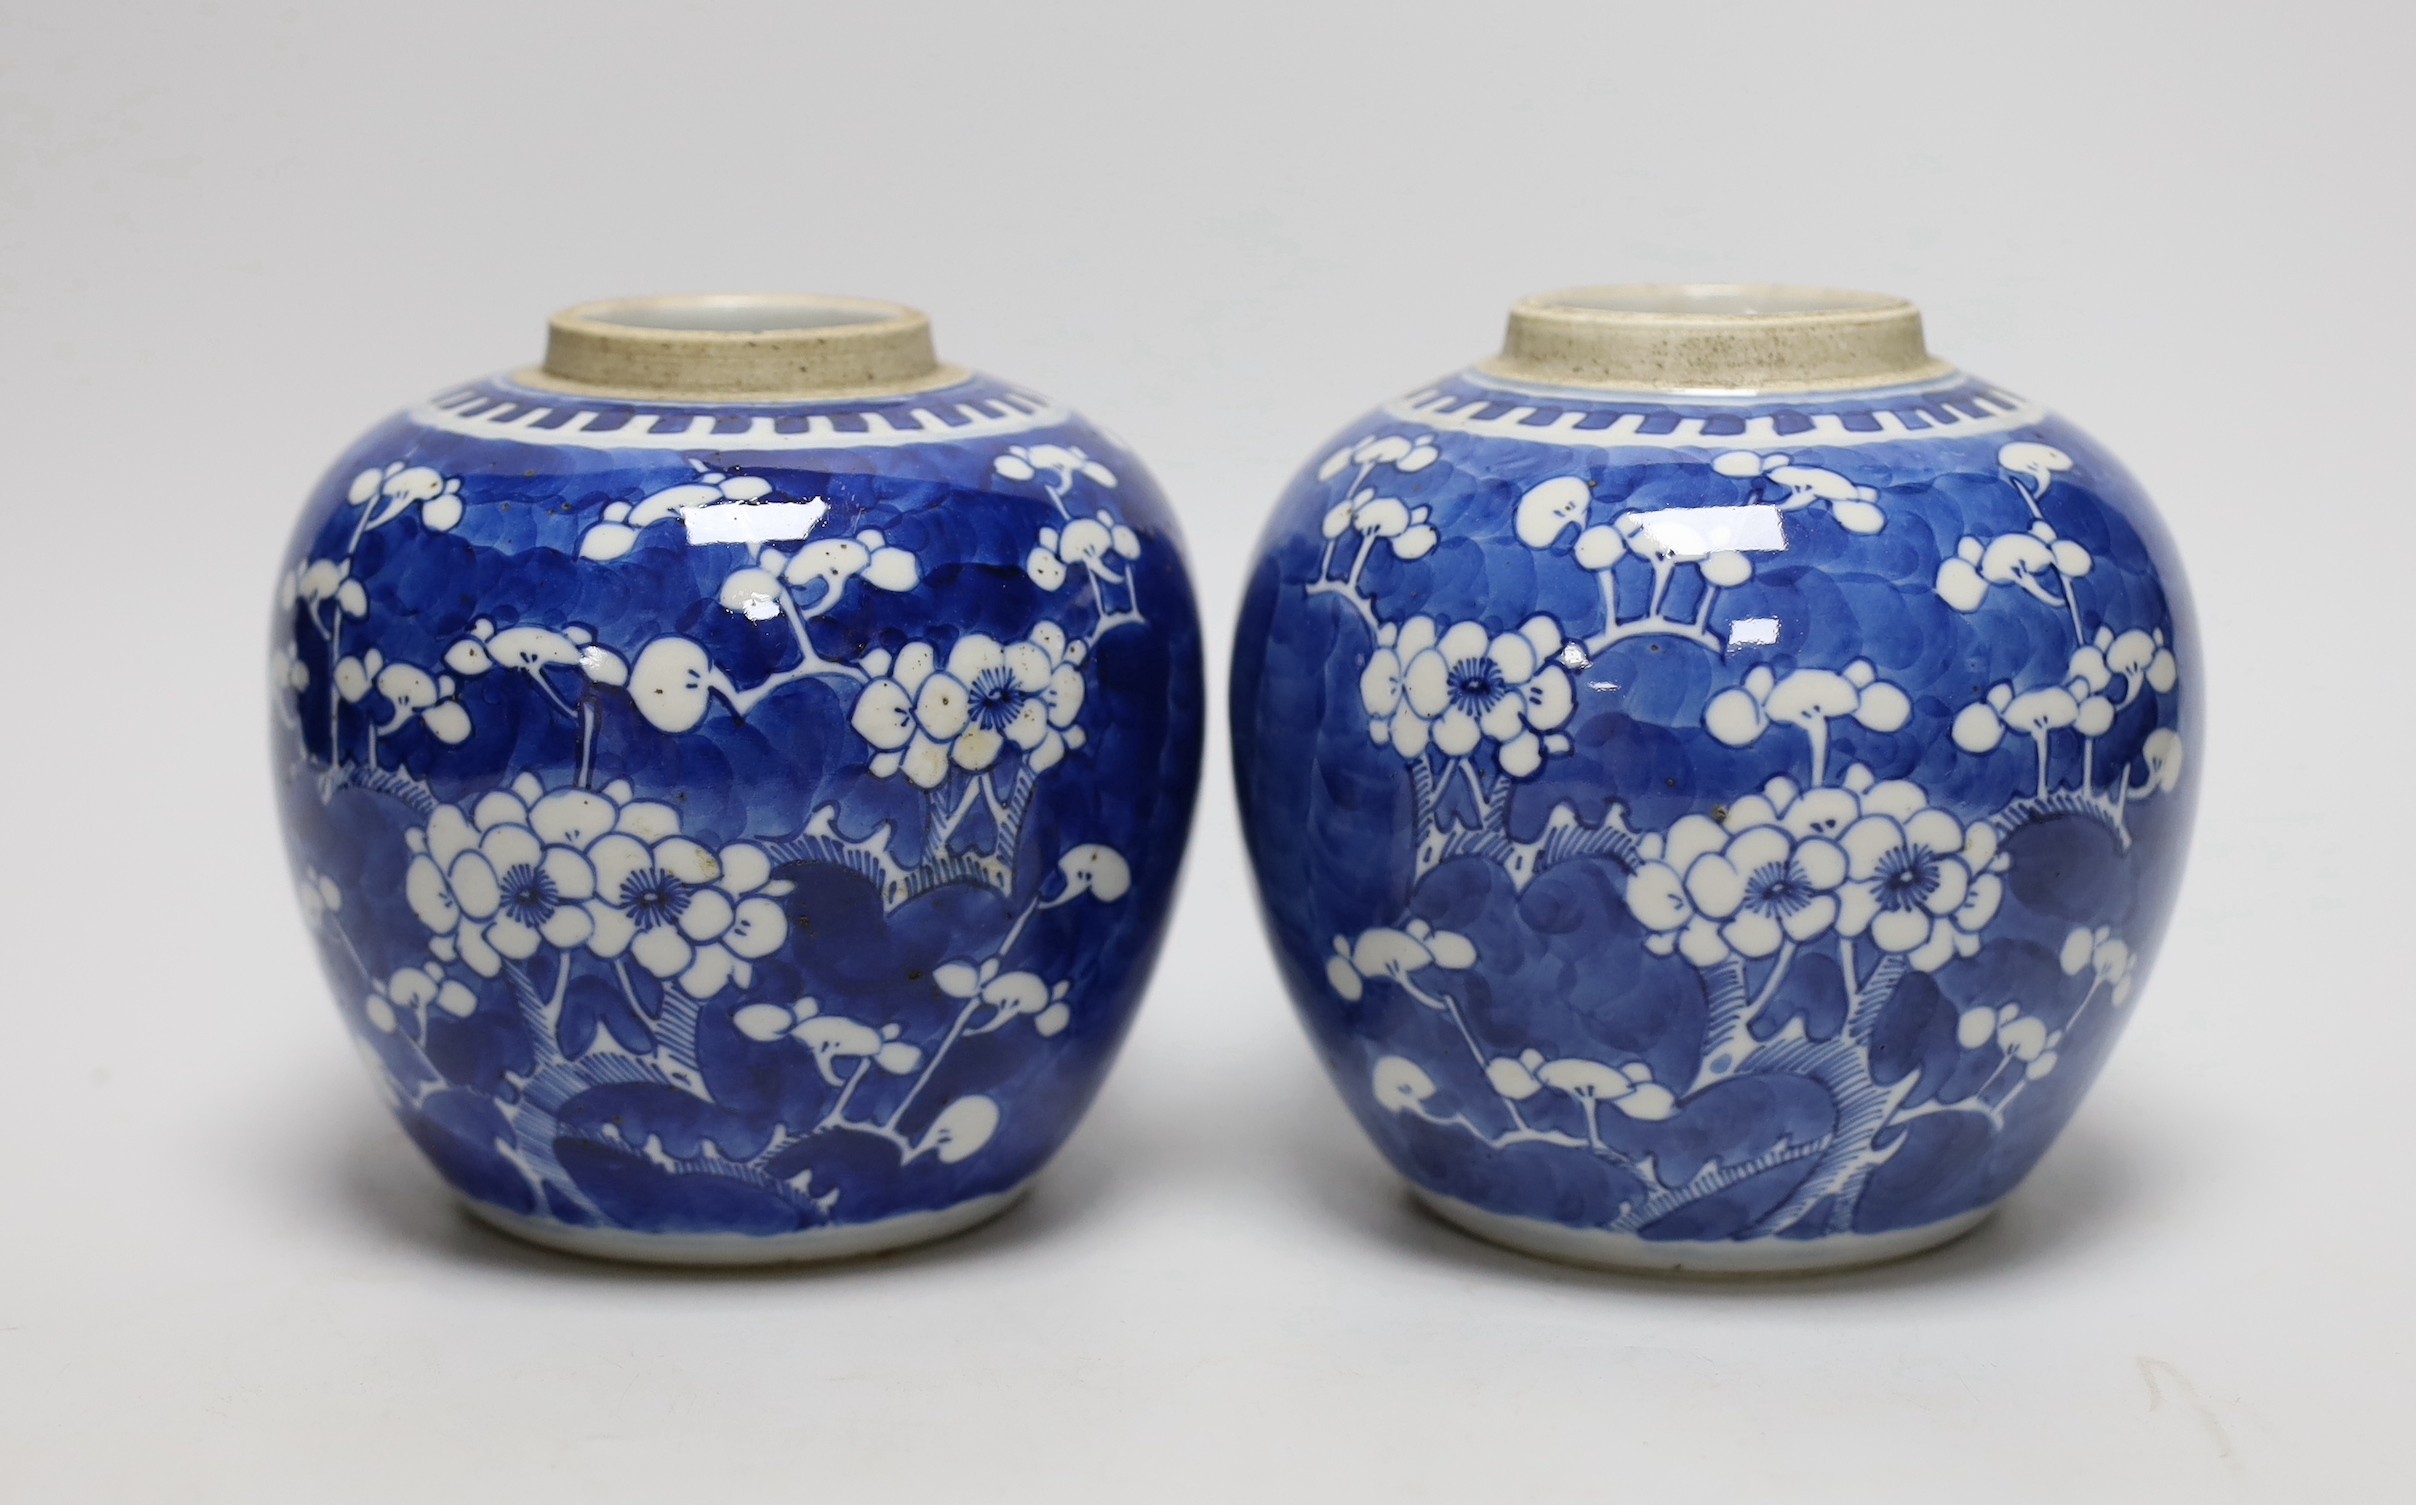 A pair of 19th centiury Chinese blue and white prunus jars, 13.5cms high